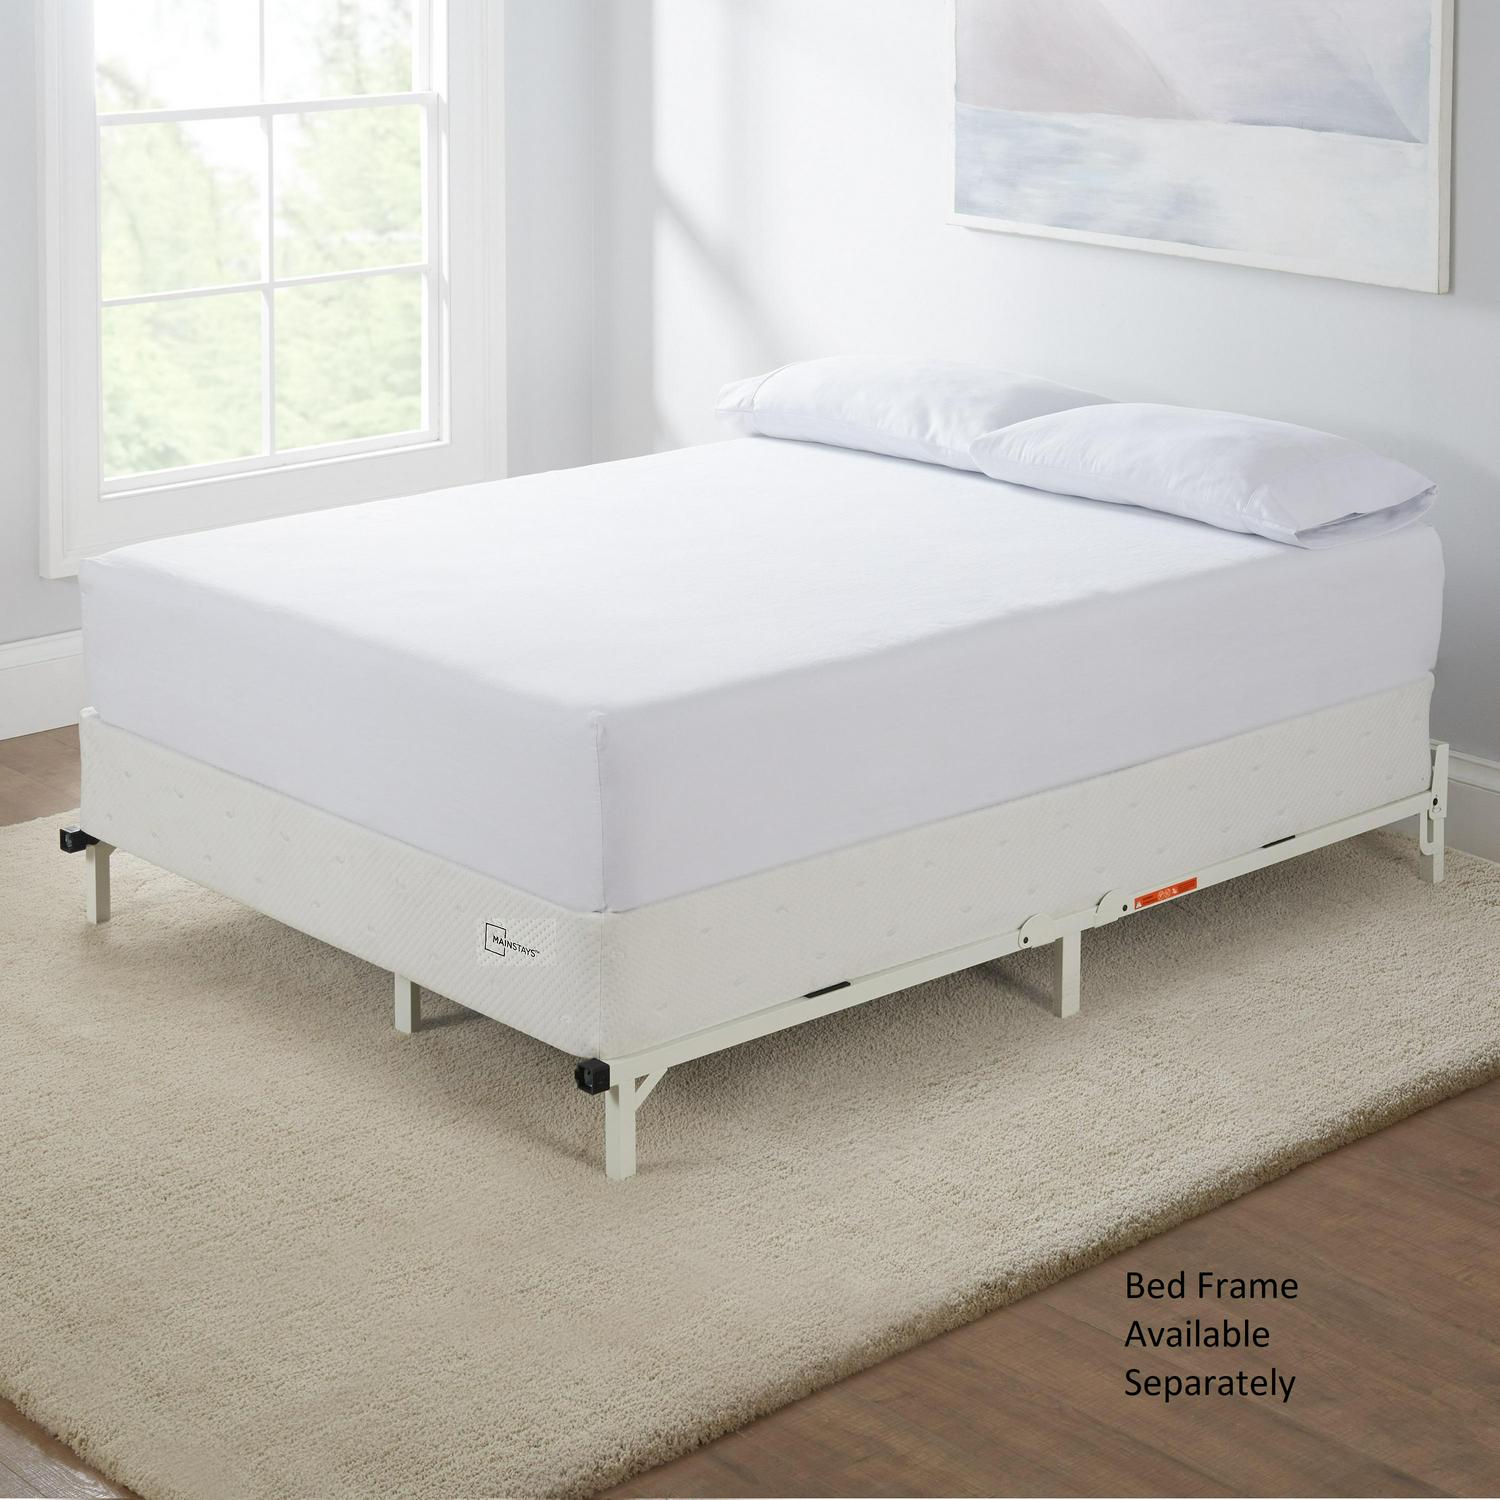 Details about   Box Spring 5" Durable Steel for Memory Foam Mattresses Twin Full Queen King Size 